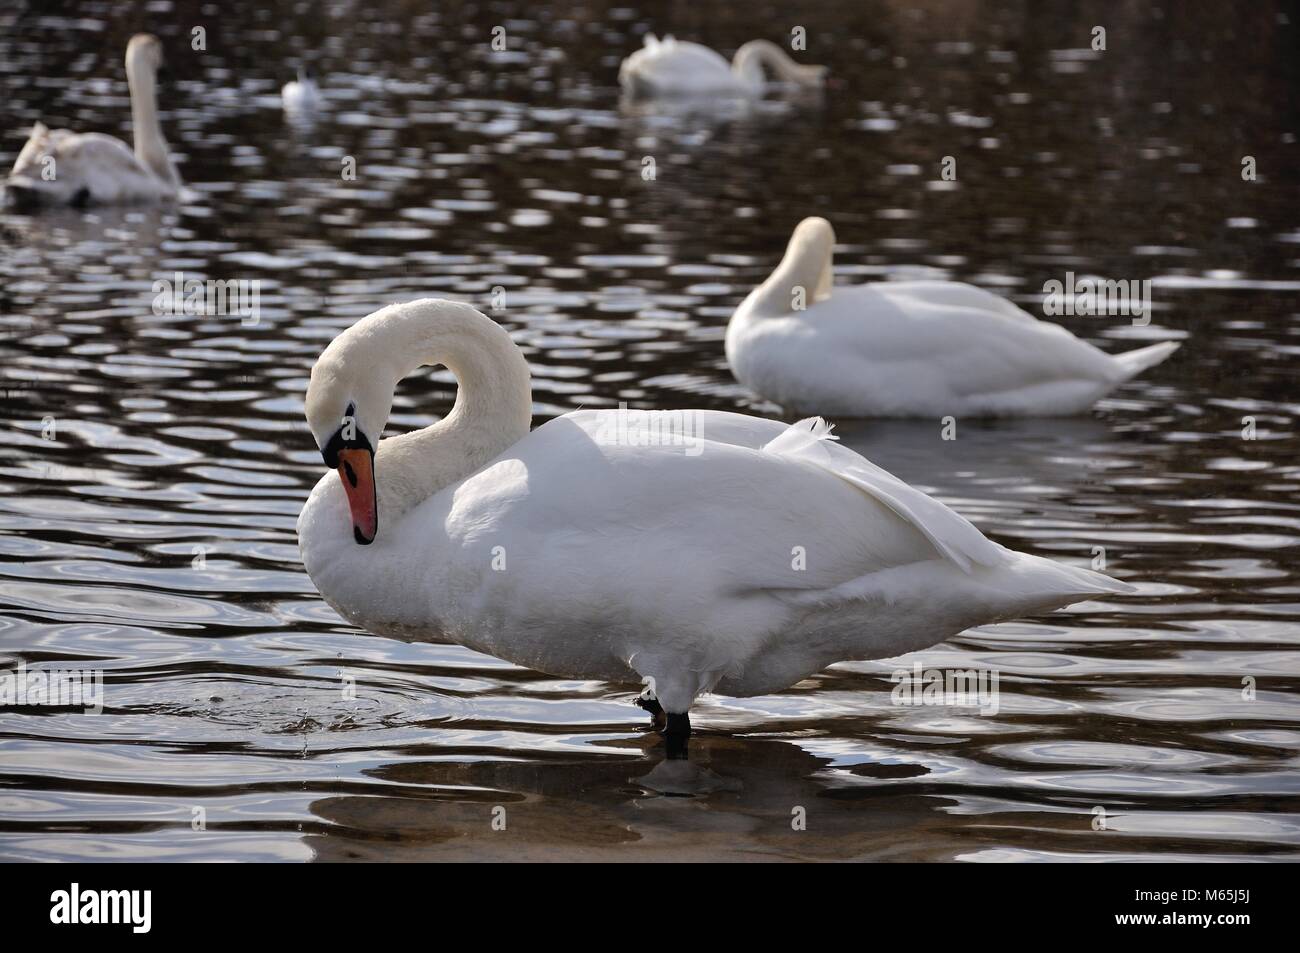 Swan standing in water with other out of focus swans in the background in Loch Ore, Fife, Scotland Stock Photo